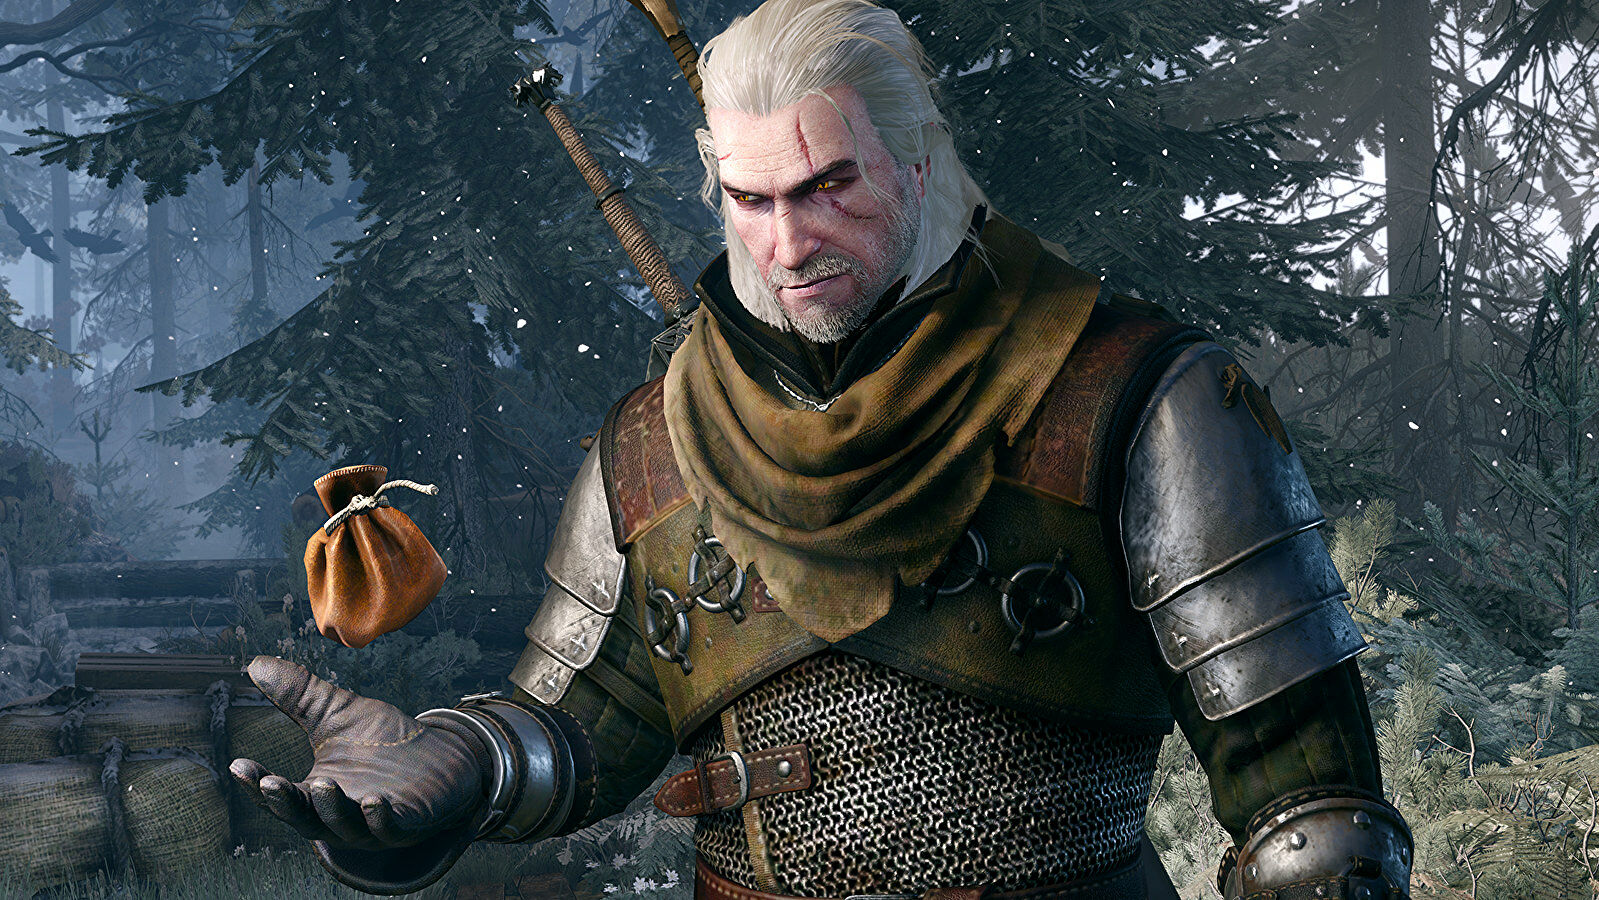 The Witcher 3's ray tracing update finally arrives in December